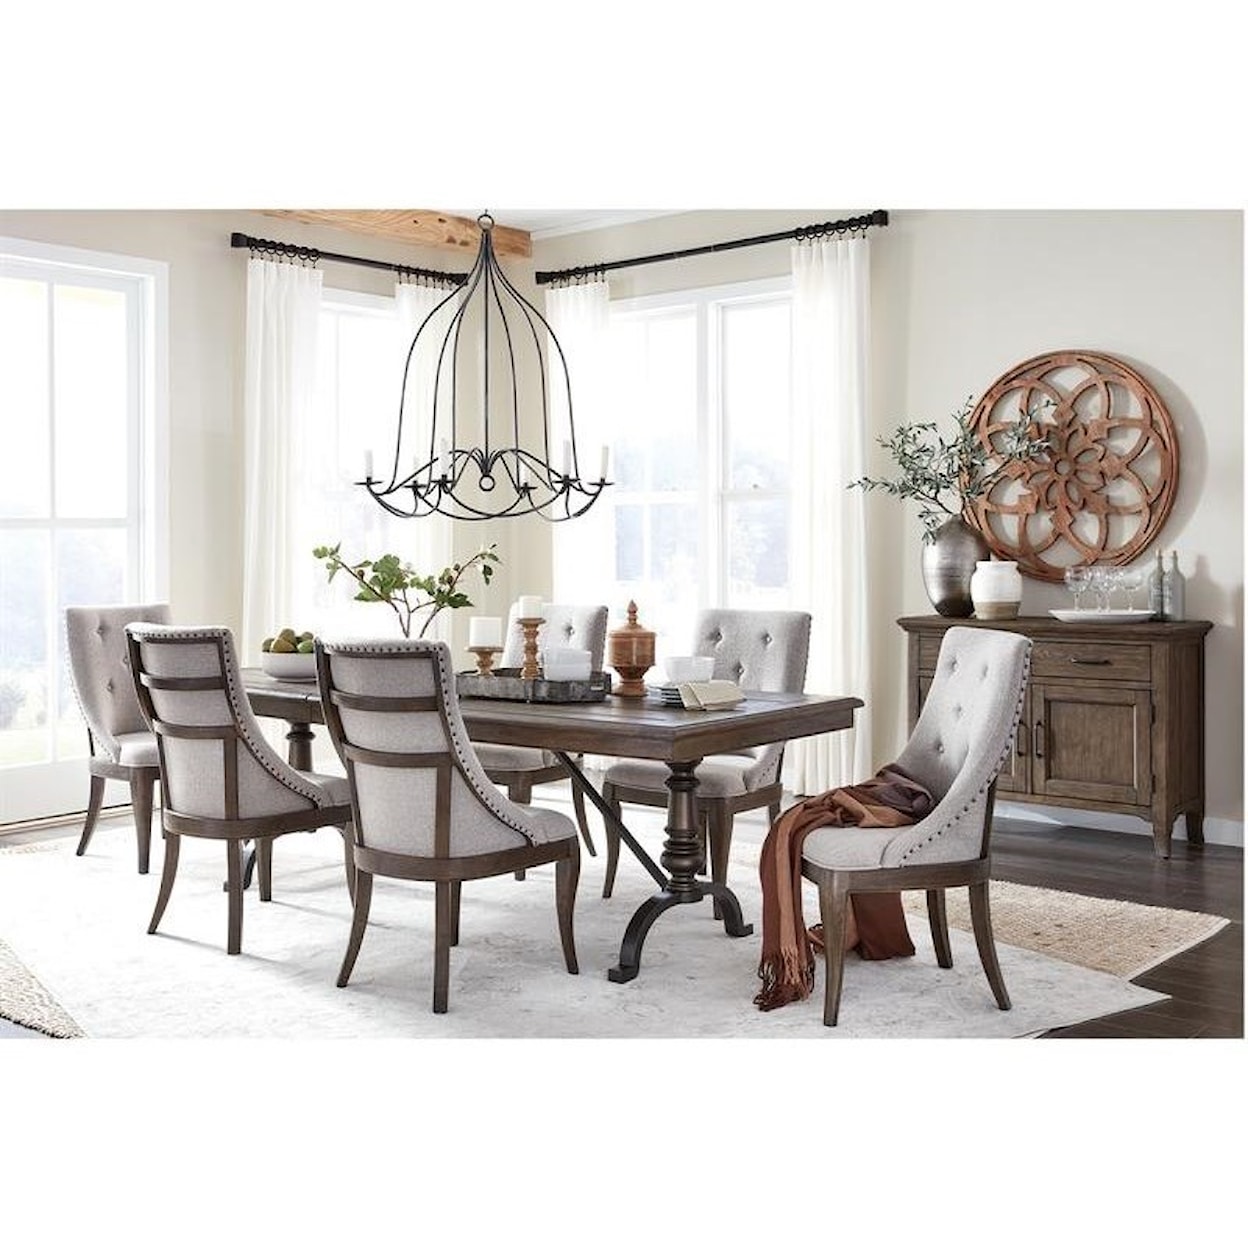 Belfort Select Withers Grove Formal Dining Group